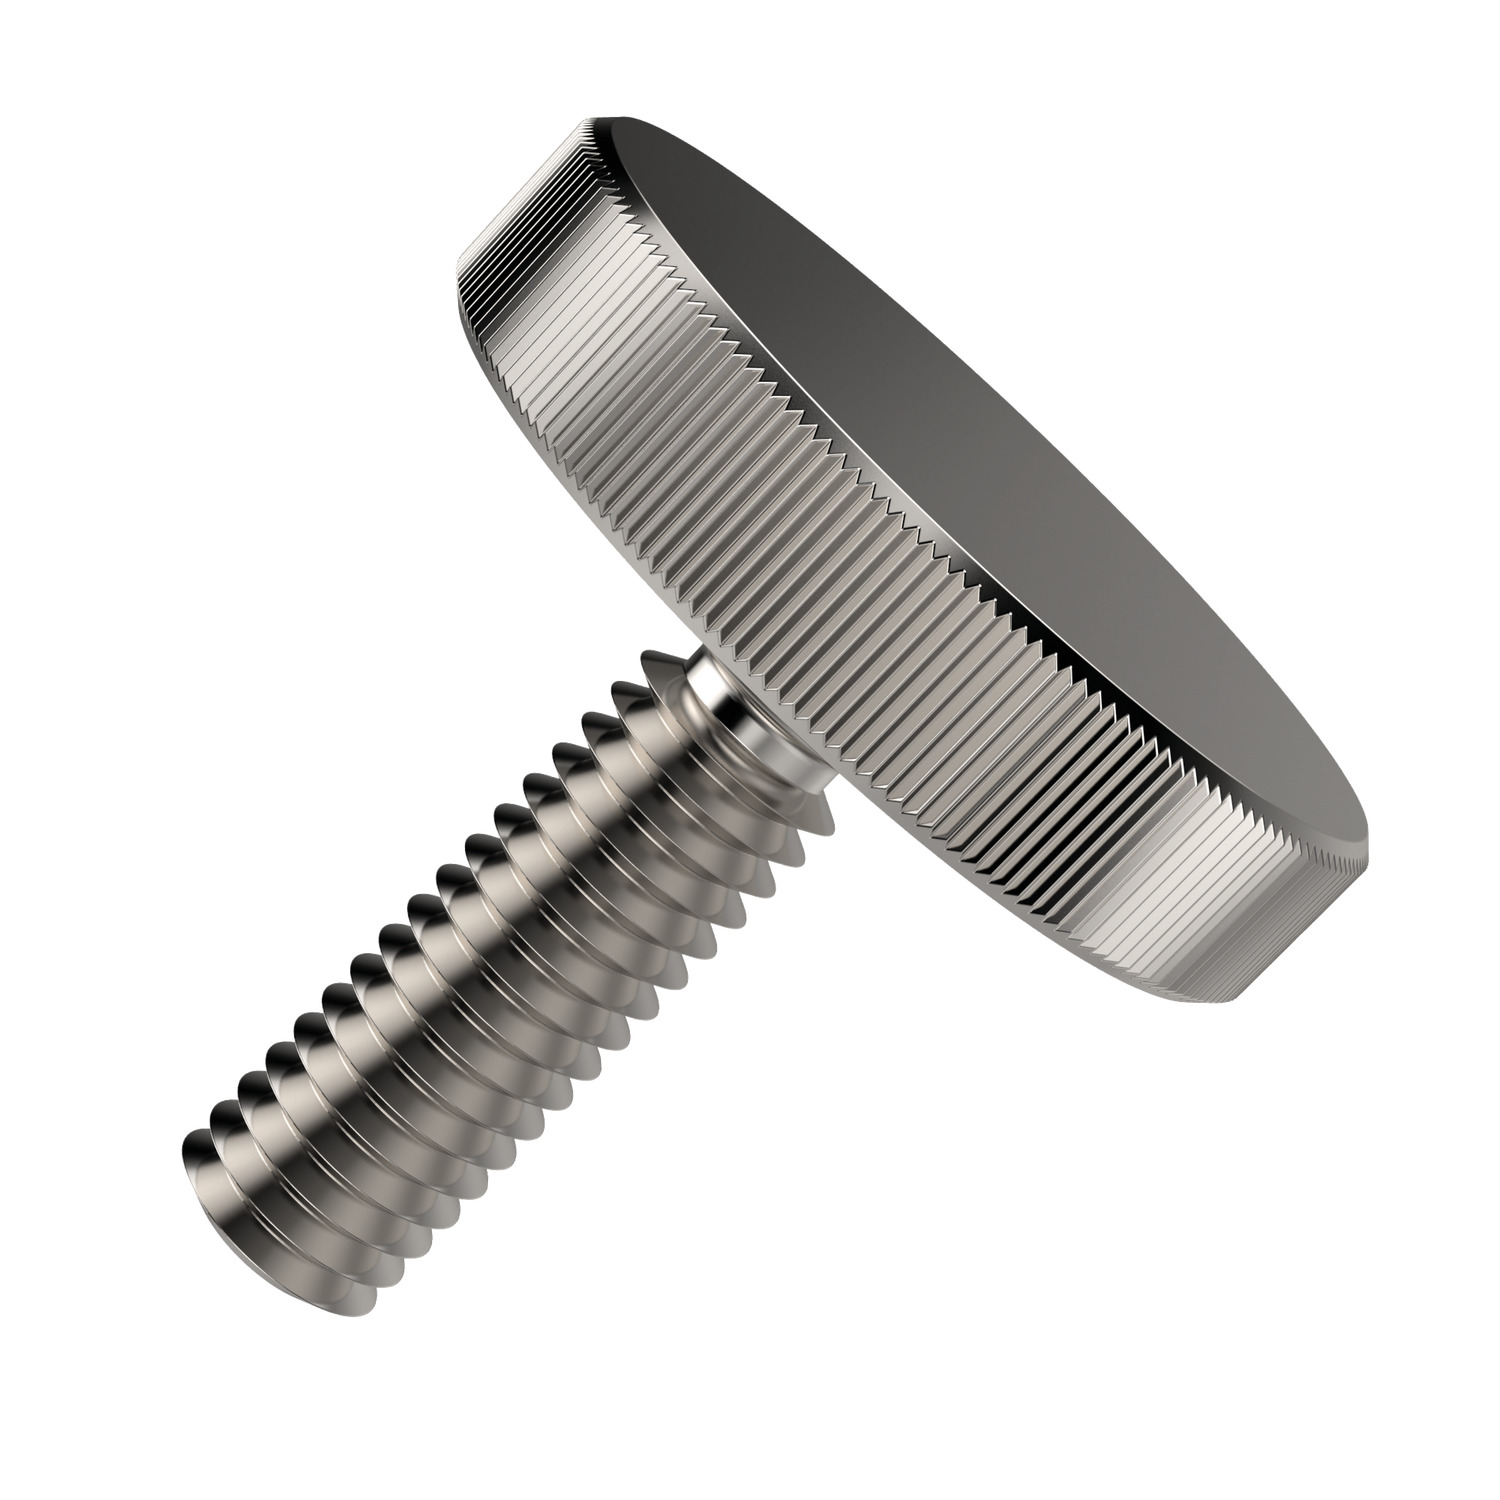 Flat Knurled Thumb Screws A stainless steel (1.4305, AISI 303) knurled thumb screw made to DIN 653.